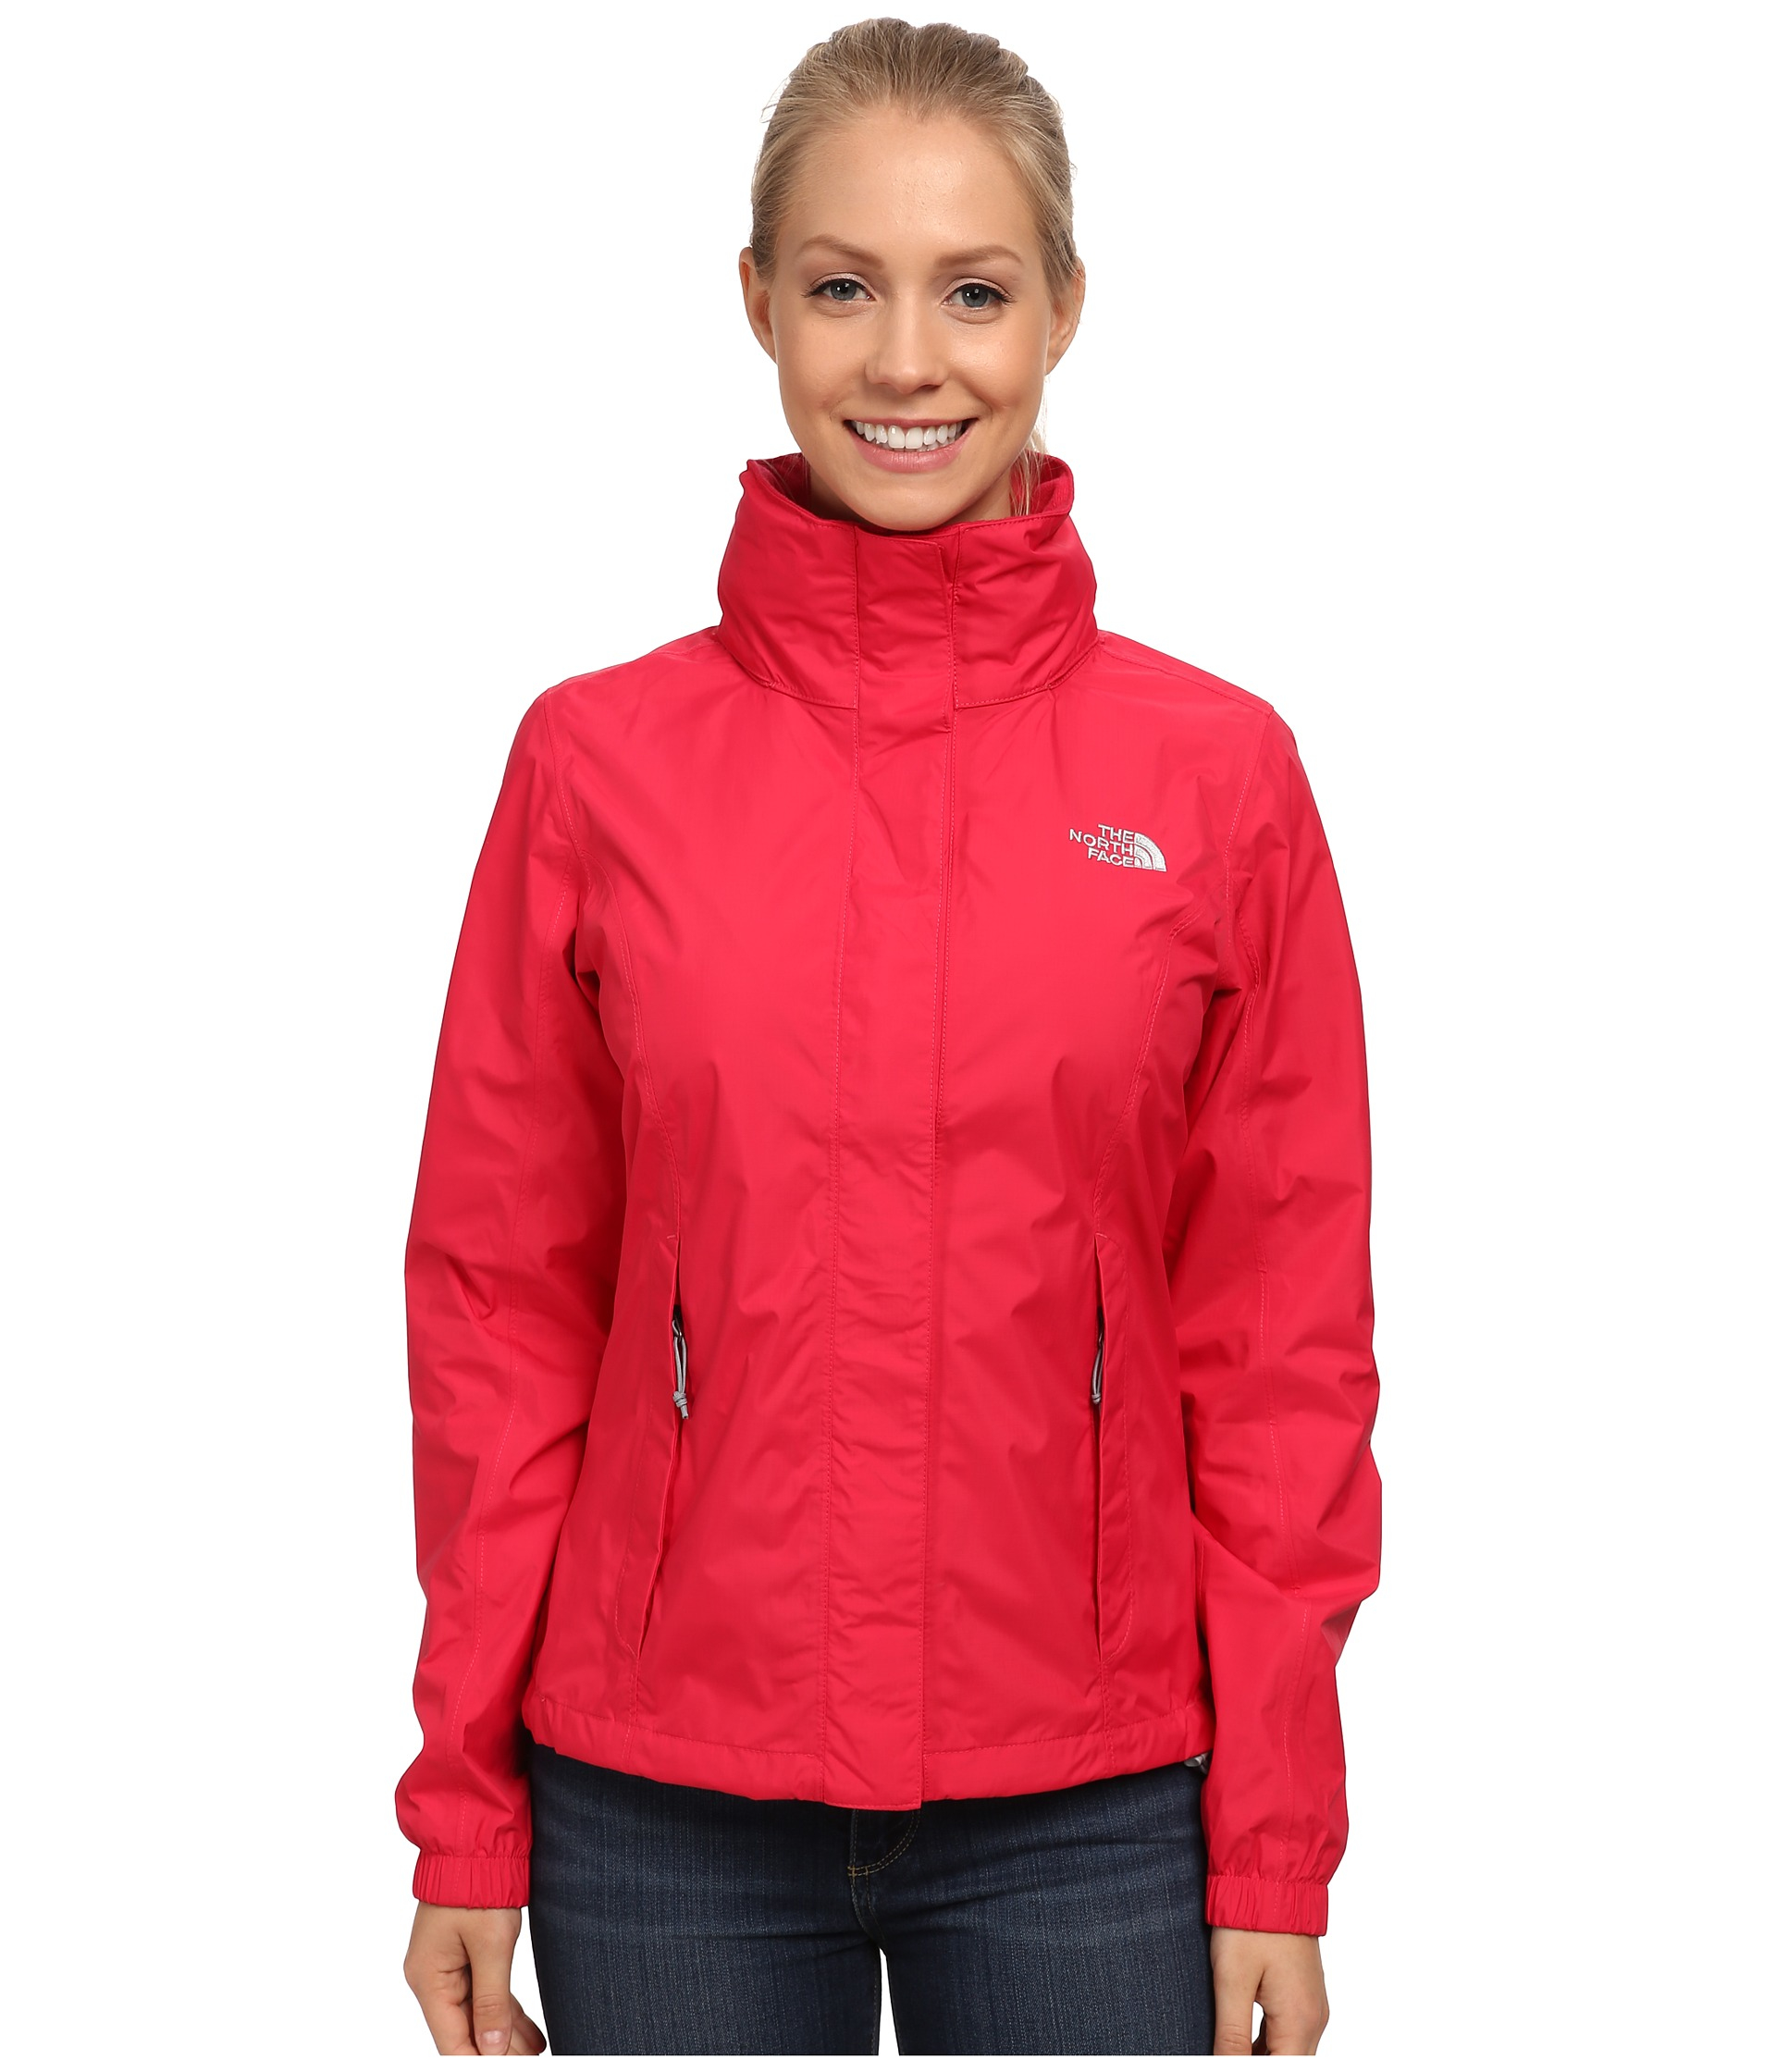 Lyst - The North Face Resolve Jacket in Red